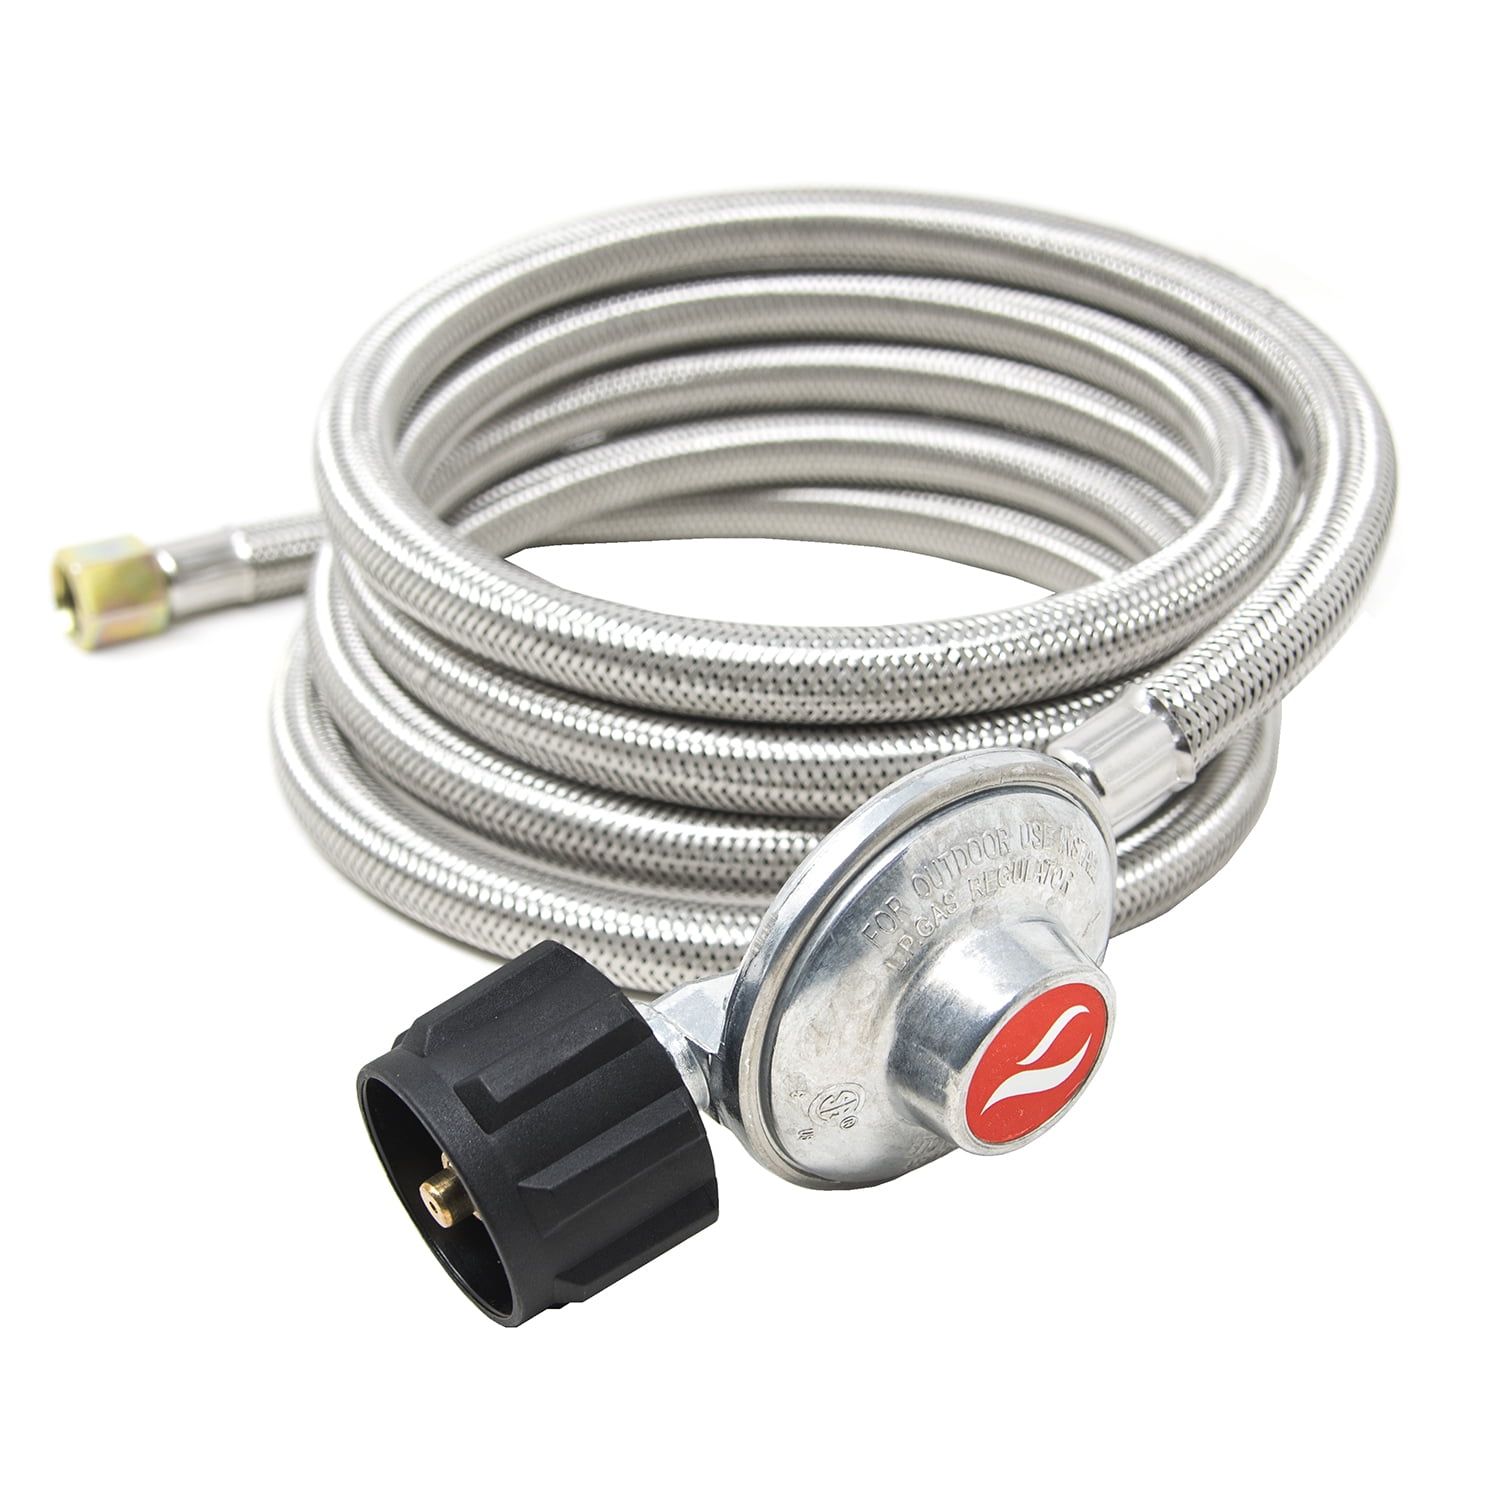 Portable Heater Regulator and Connecting Hose for Lpg Lp Calor Propane Type Gas 